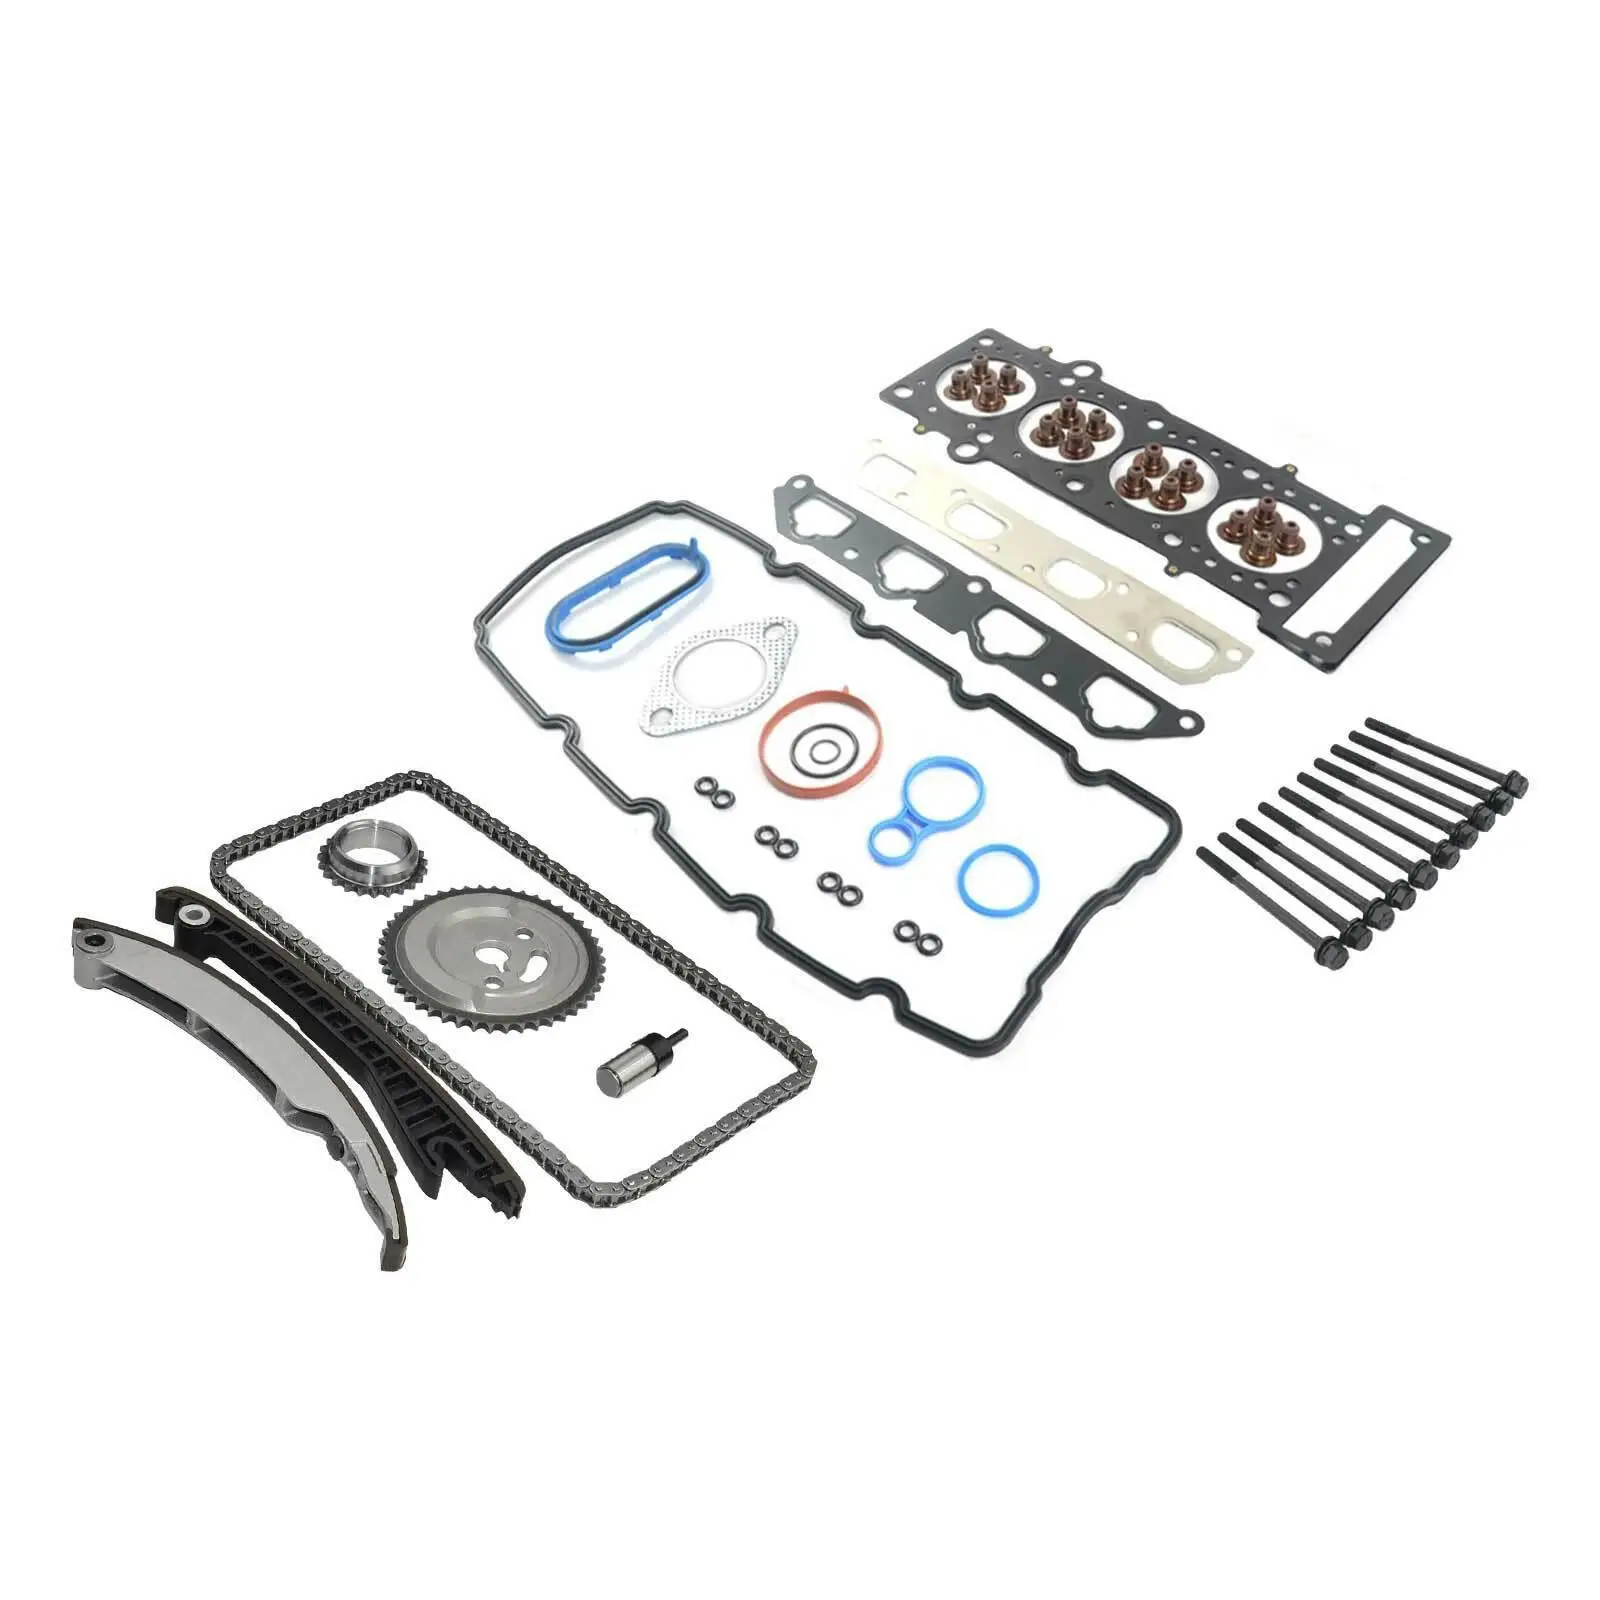 

AP03 New Engine Timing Chain Kit+Cylinder Head Gasket Set+Bolts 11317510736 For Mini Cooper S JCW Works R50 R53 R52